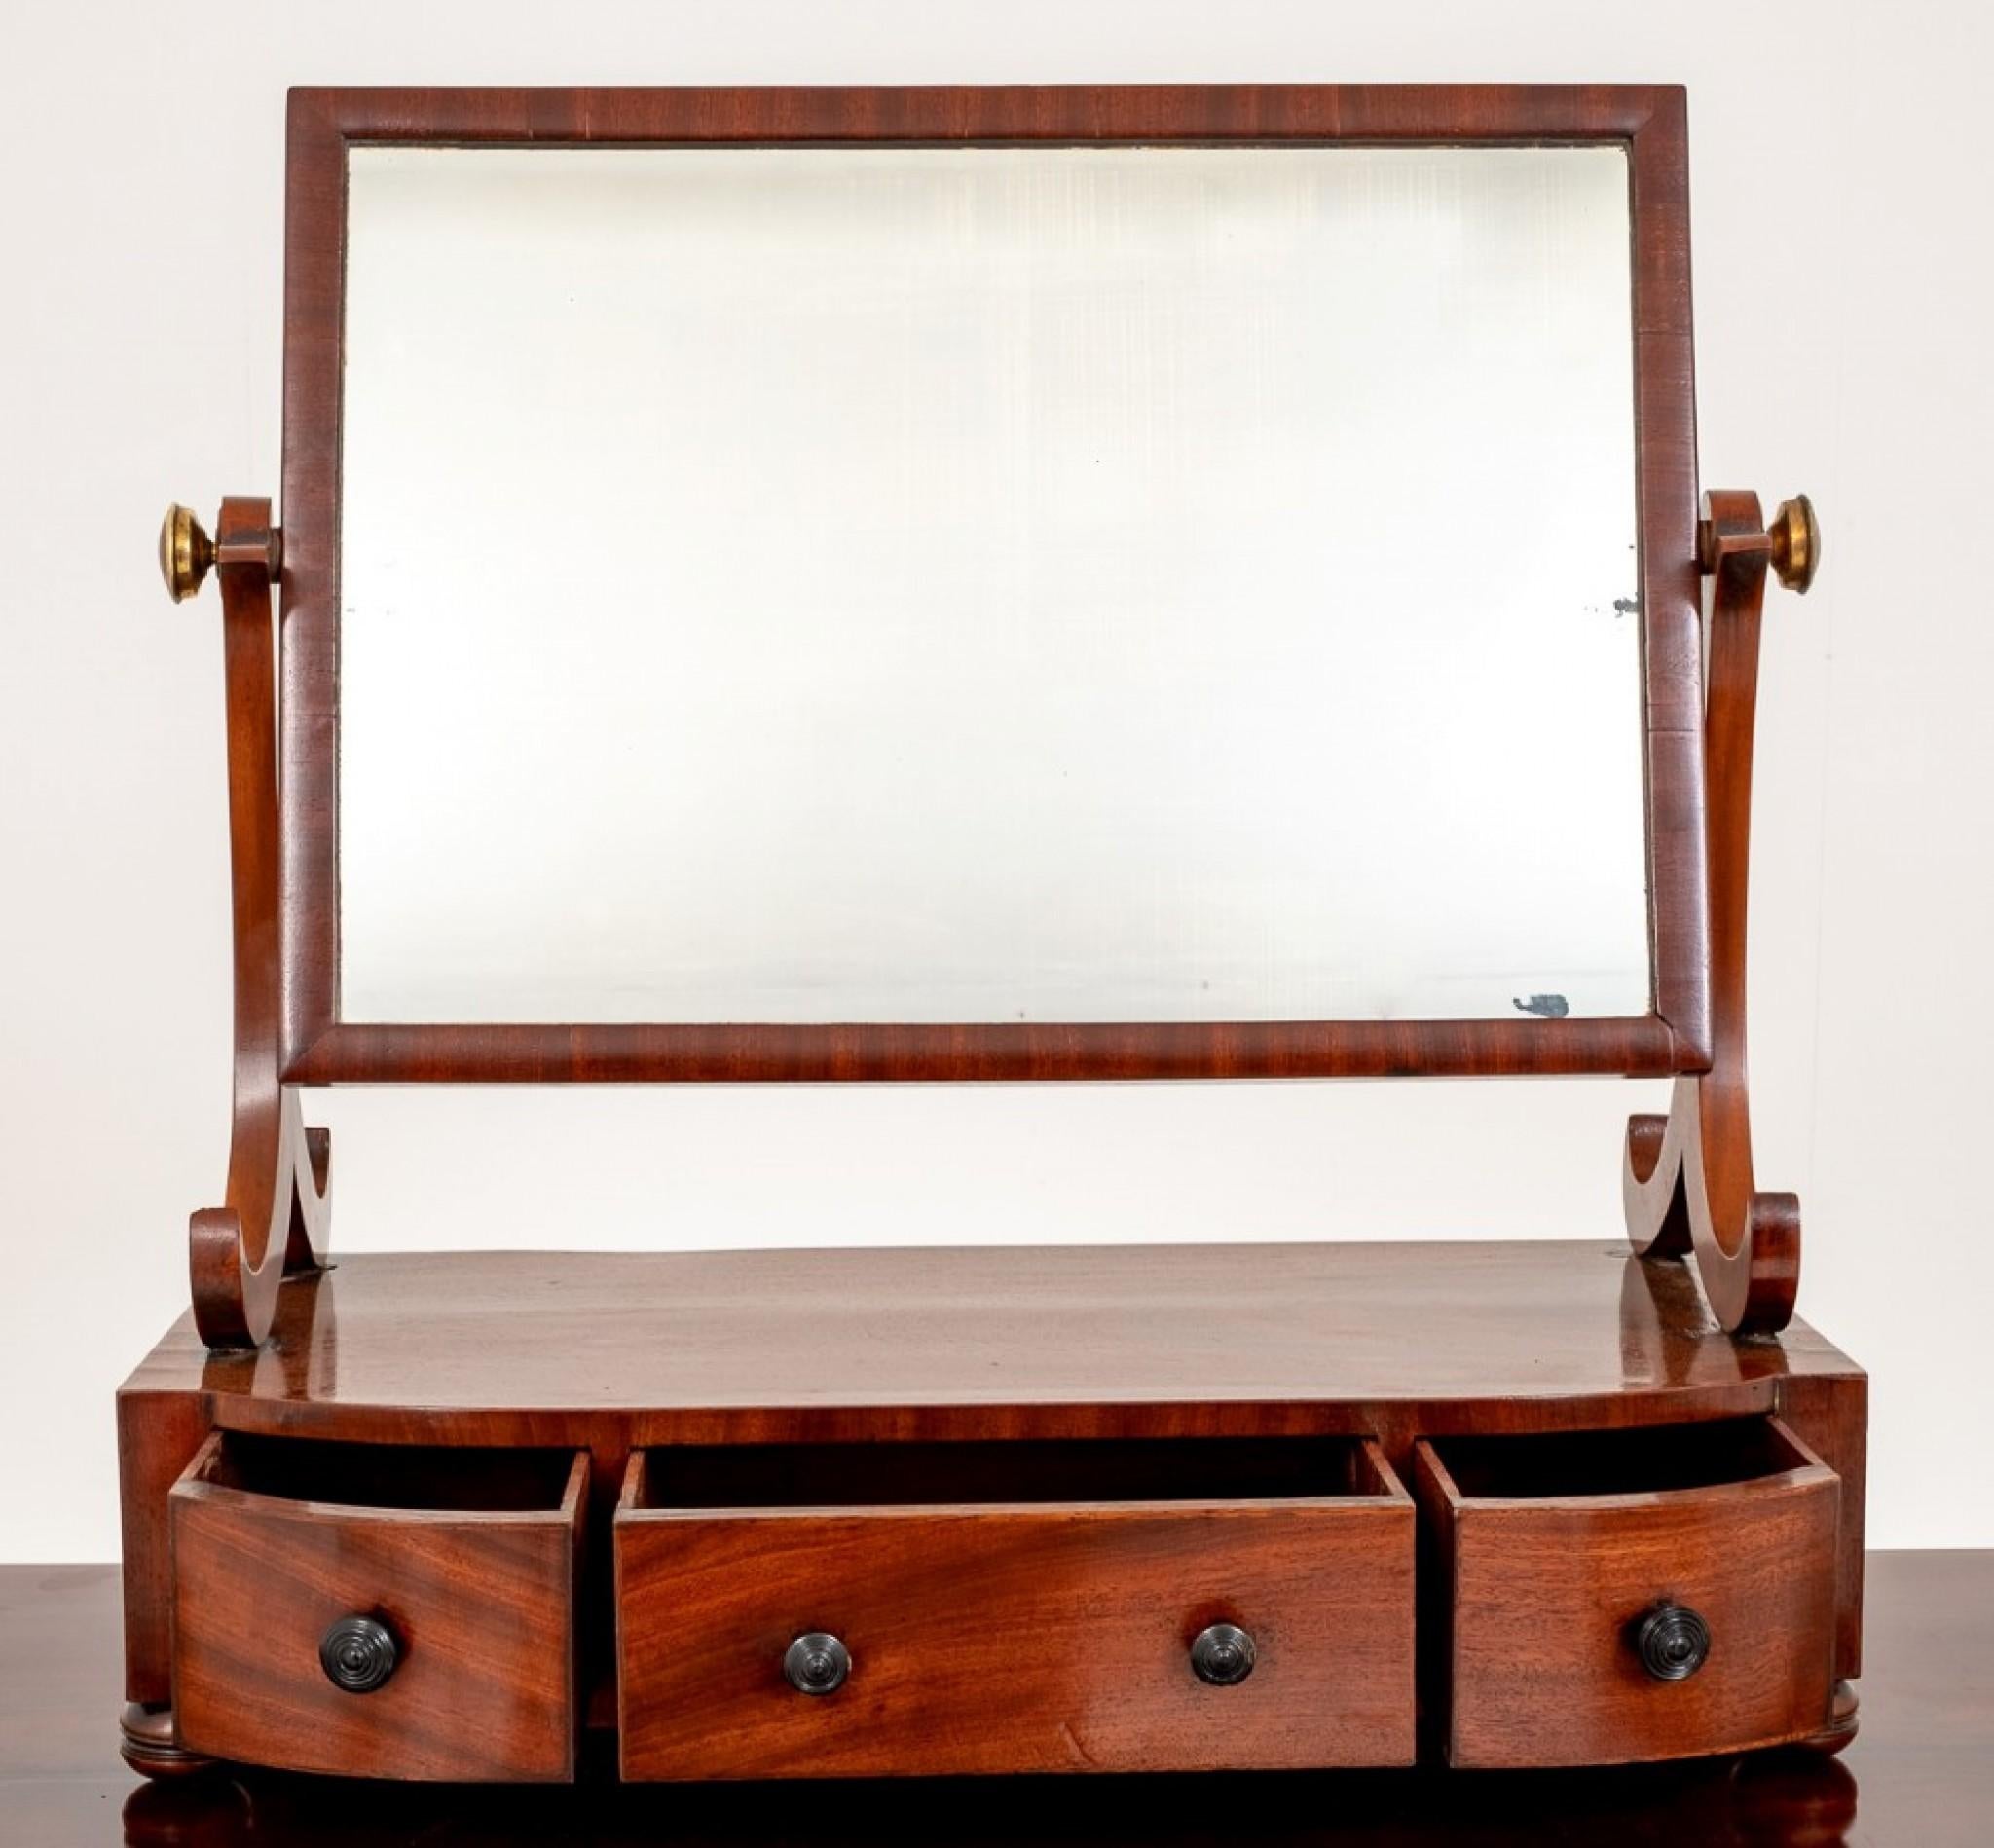 A Very Pretty Regency Mahogany Dressing Mirror.
19th century
Featuring 3 Shaped Mahogany Lined Drawers (note the fine dovetails)
Having turned Bun feet.
The Swivel Mirror Supported by Stylised Supports.
In Excellent Condition.
     